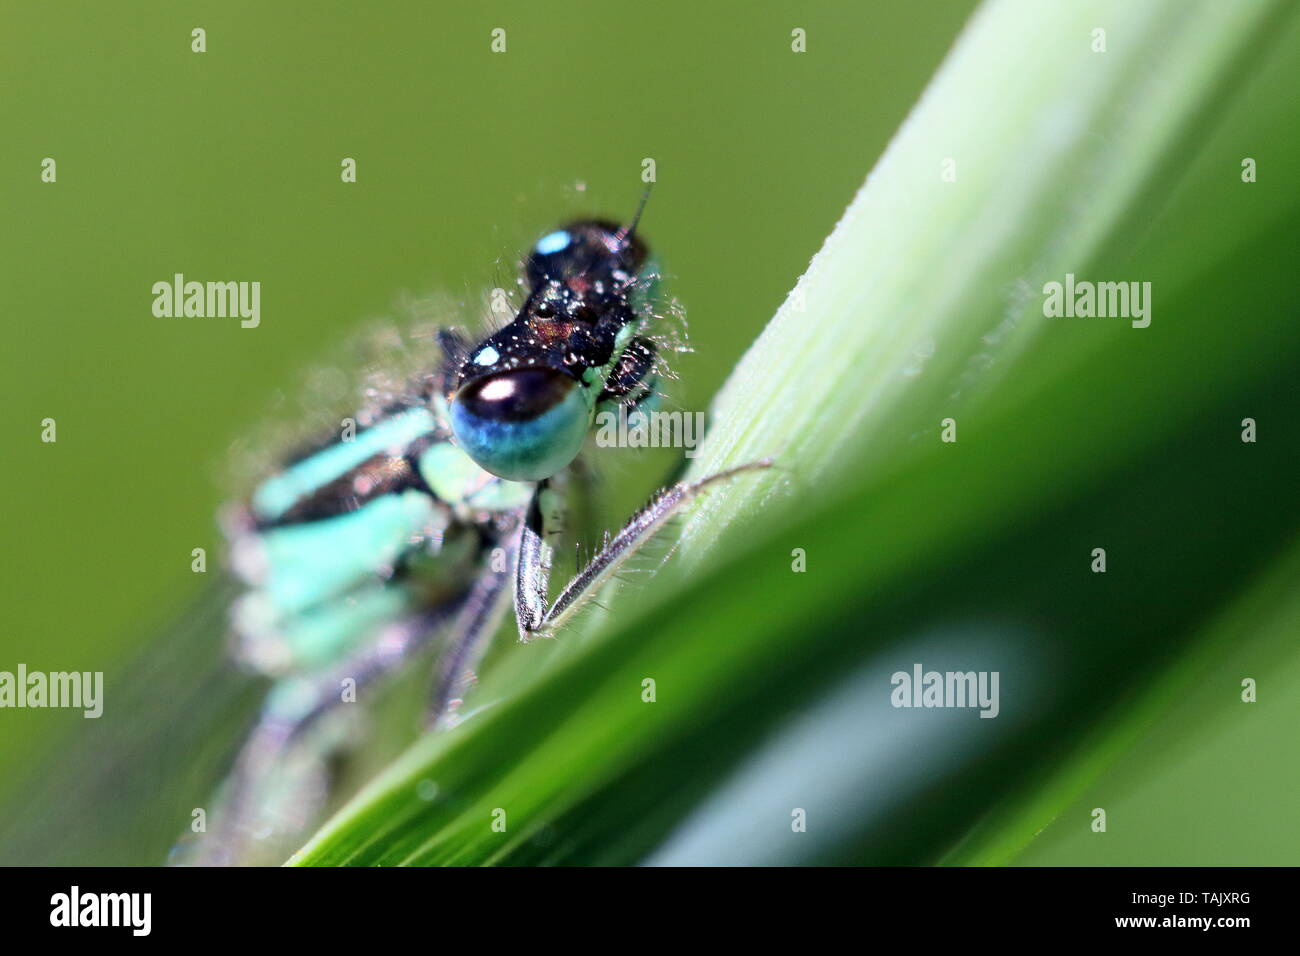 Close up of the head of a blue tailed male damsel fly (Ischnura elegans) on a plant leaf Stock Photo